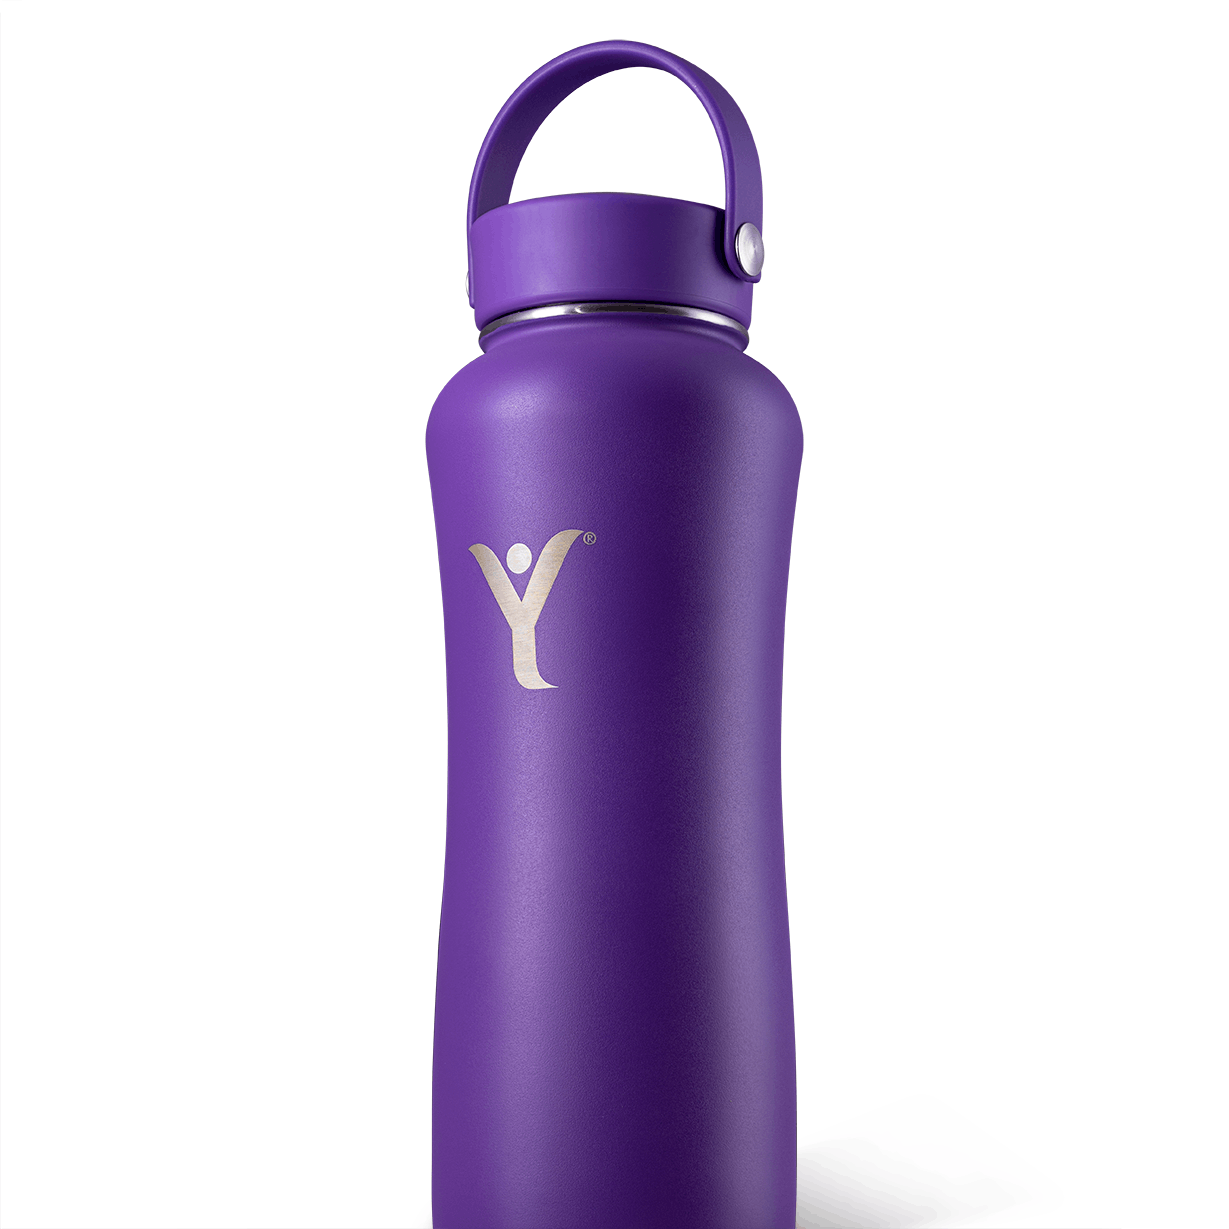 The DYLN Insulated Water Bottle media 2